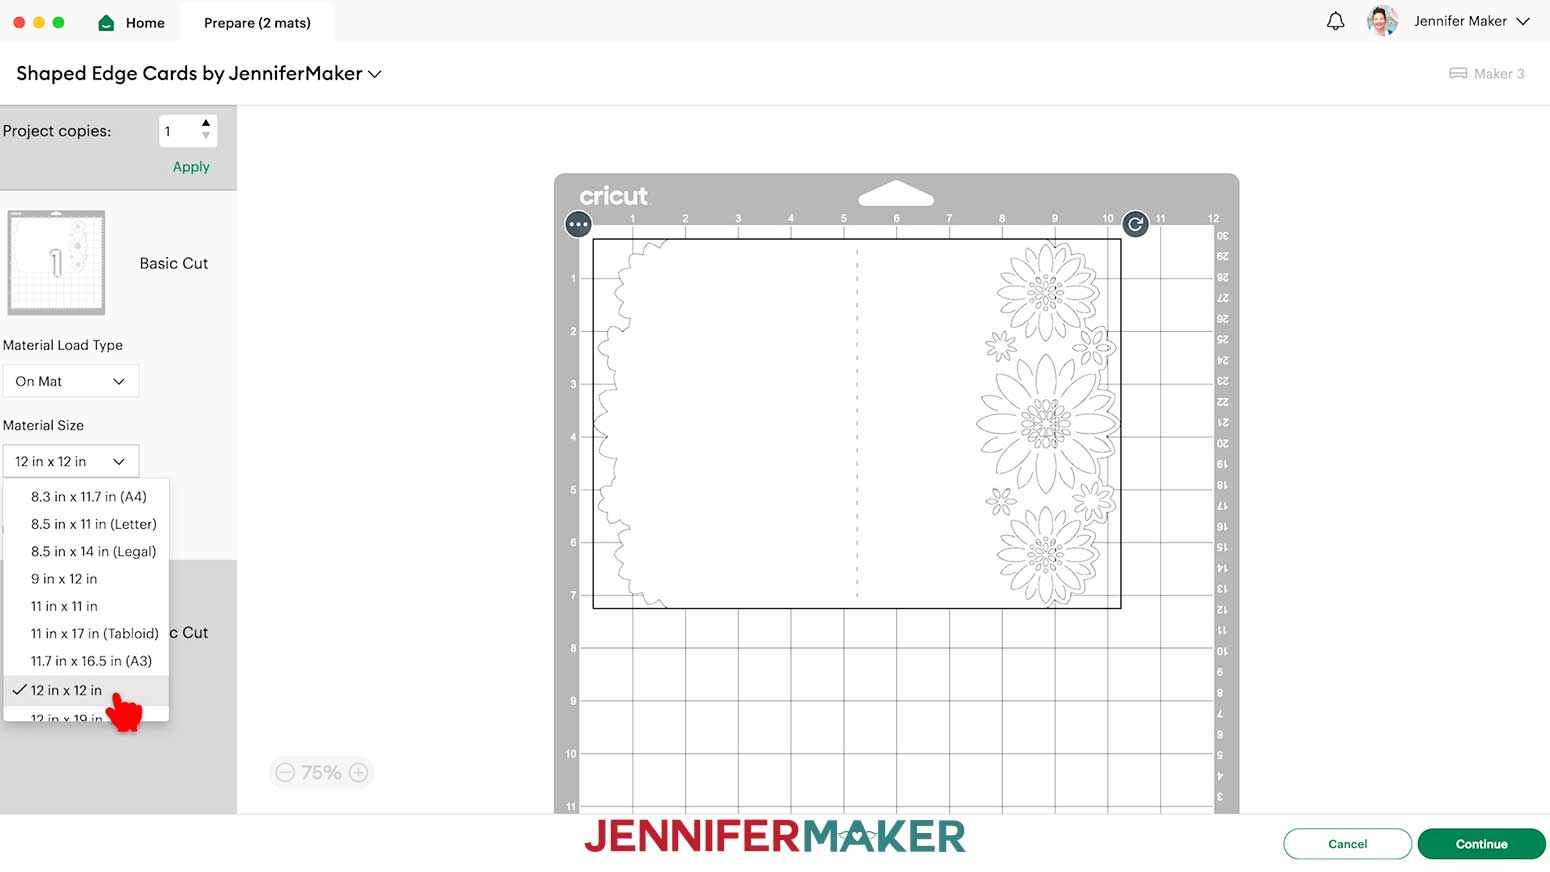 On the Cricut Design Space Prepare screen, make sure your Material Size matches your cardstock size for your shaped edge cards